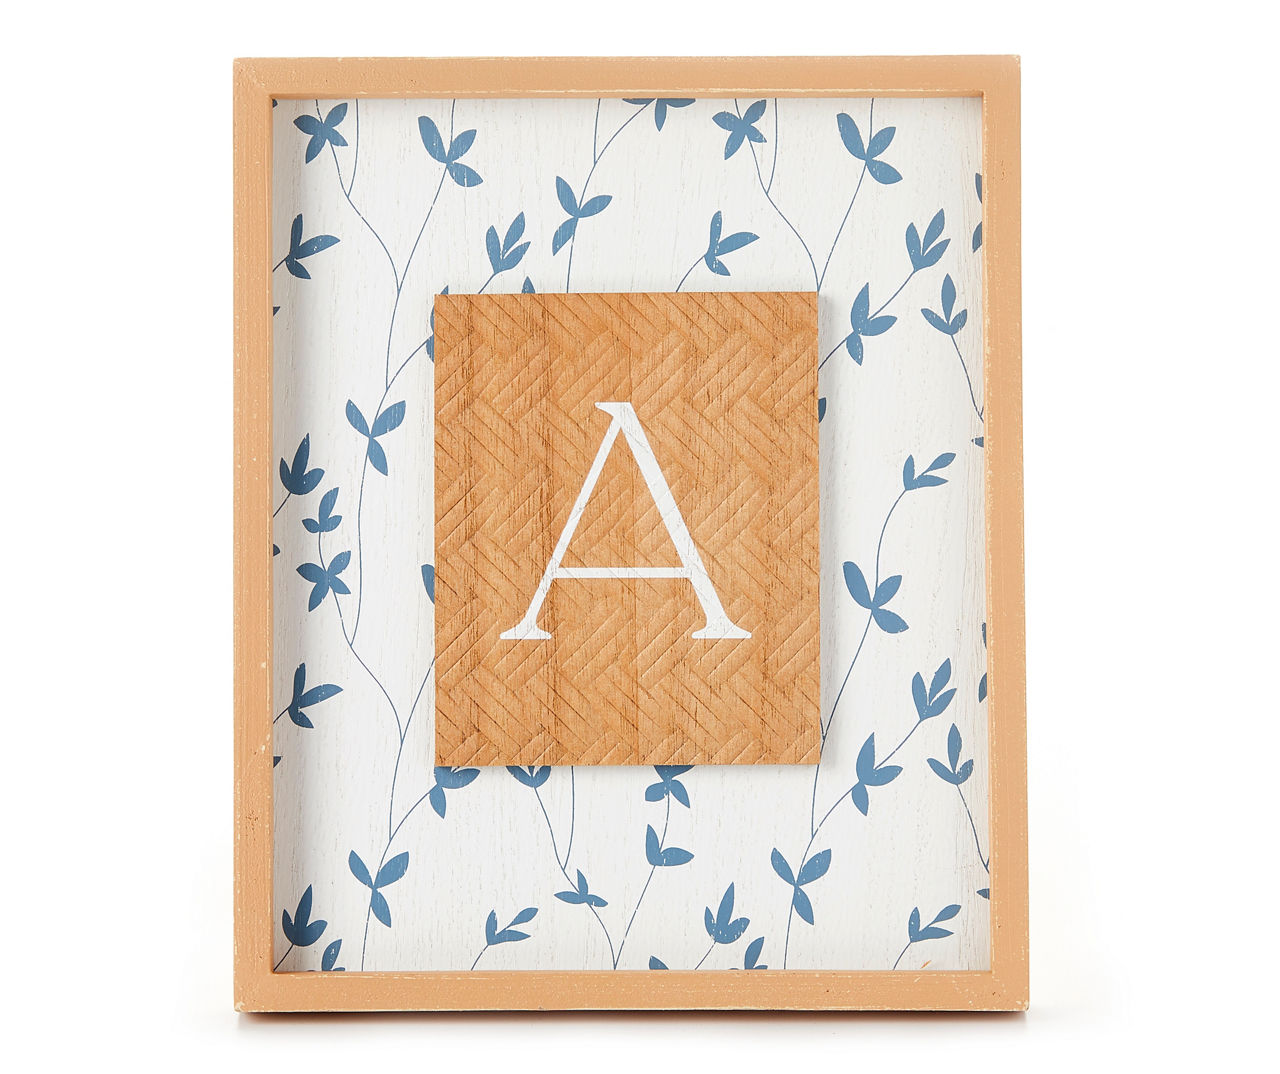 "A" White, Brown & Blue Floral Tabletop Plaque With Easel